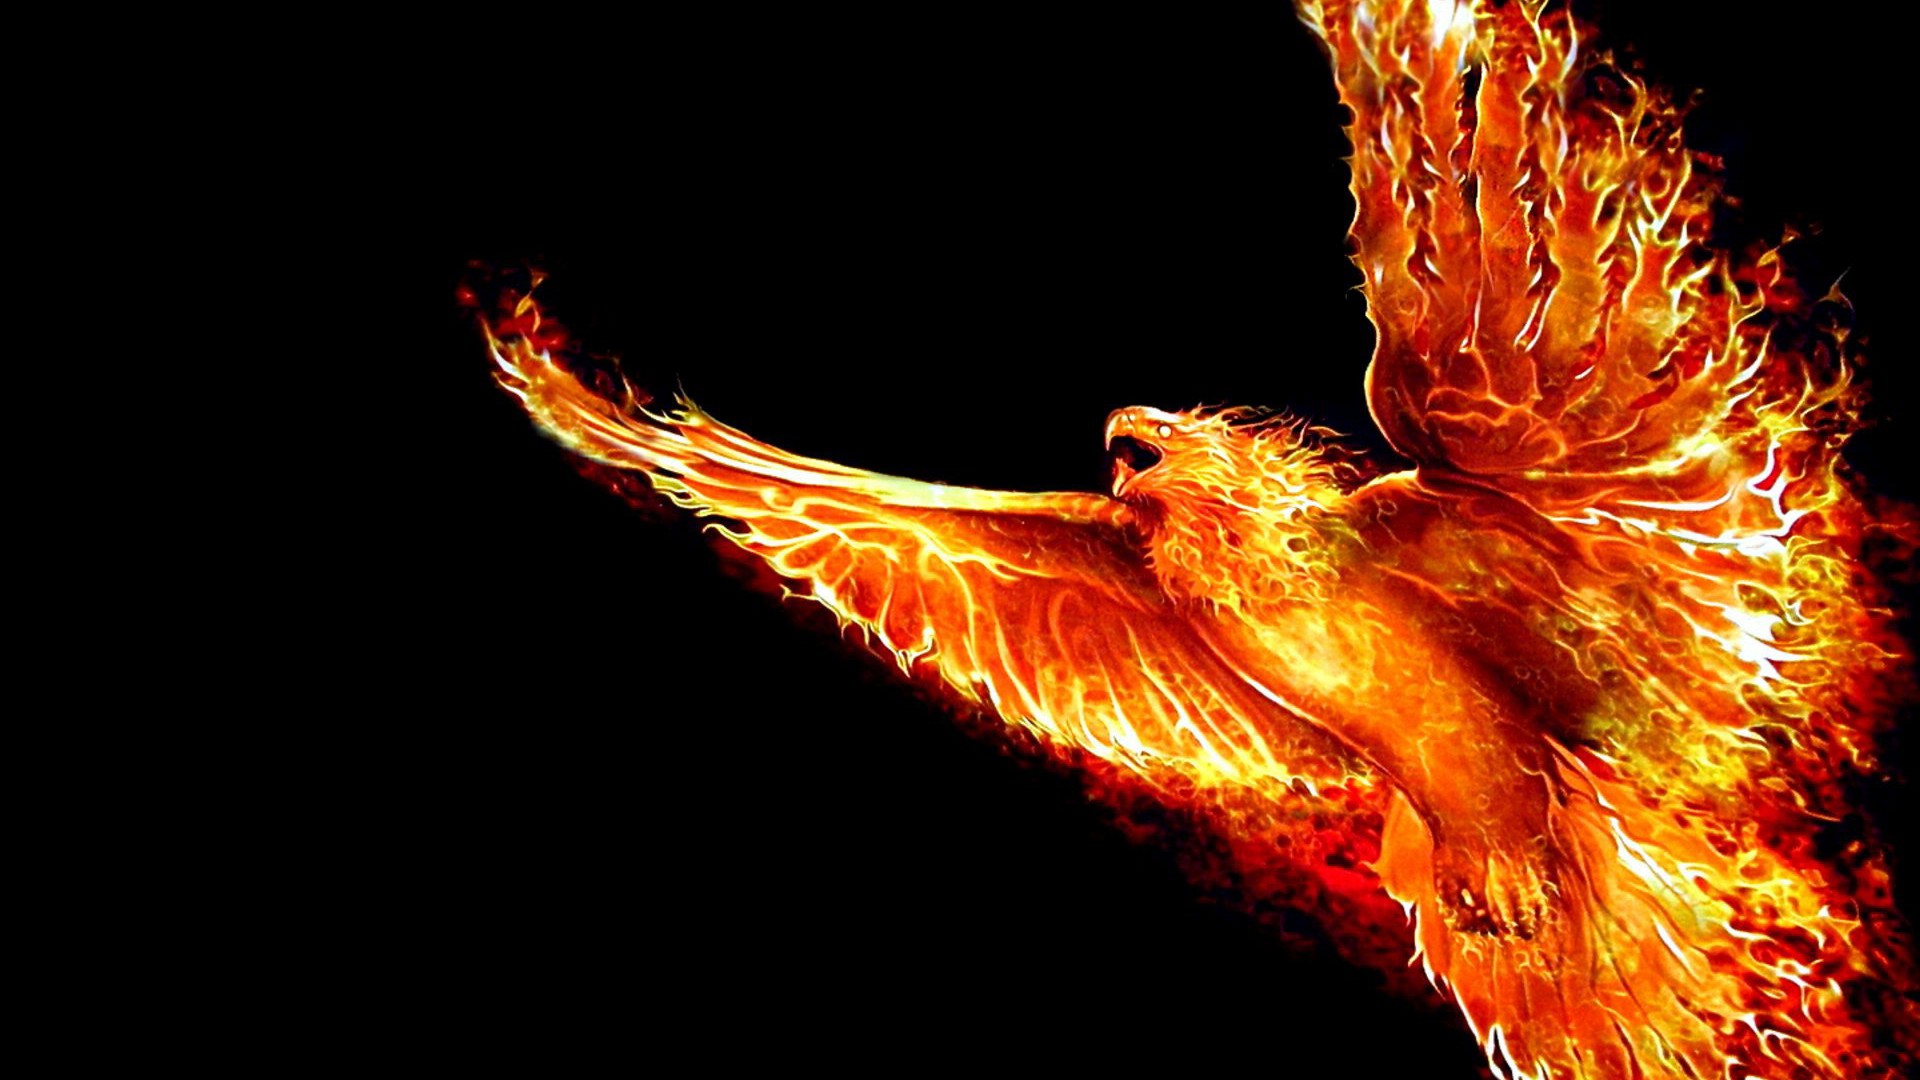 Dark Phoenix Desktop Backgrounds With Resolution 1920X1080 pixel. You can make this wallpaper for your Desktop Computer Backgrounds, Mac Wallpapers, Android Lock screen or iPhone Screensavers